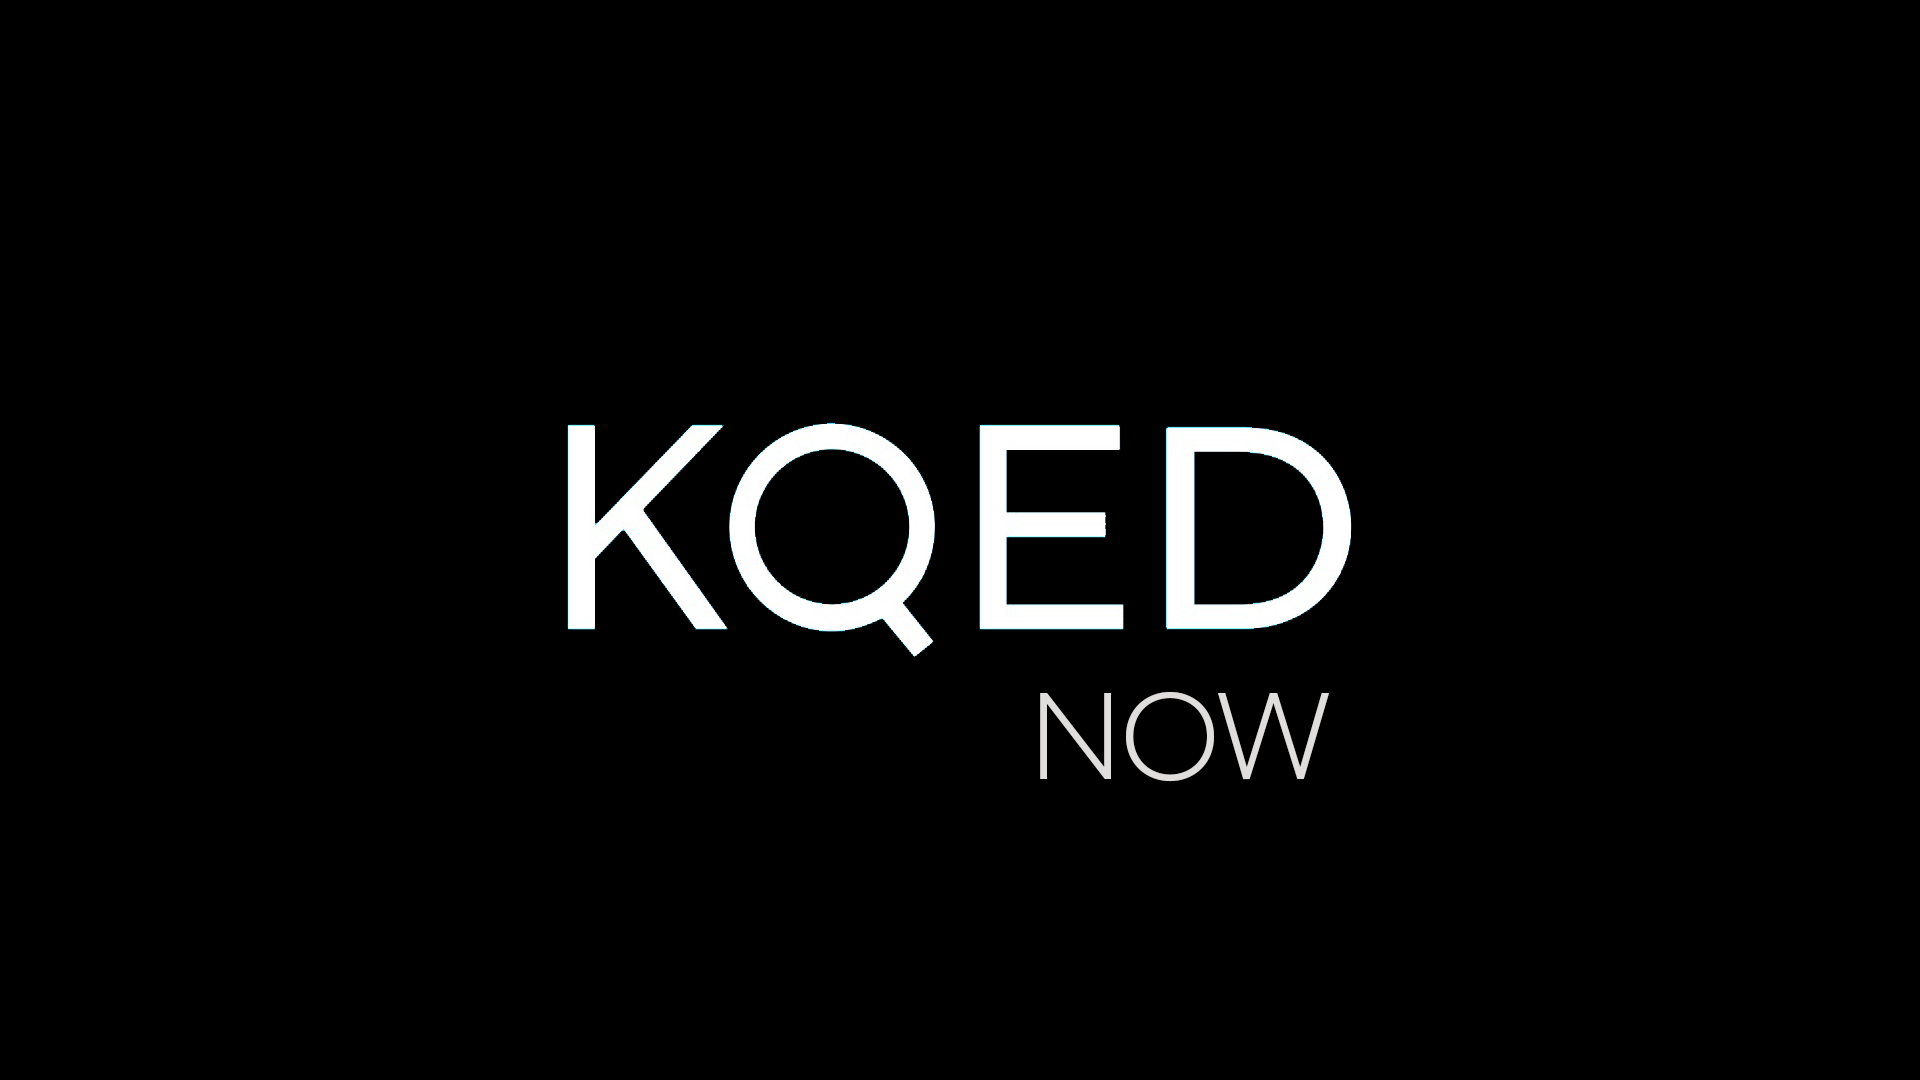 KQED NOW